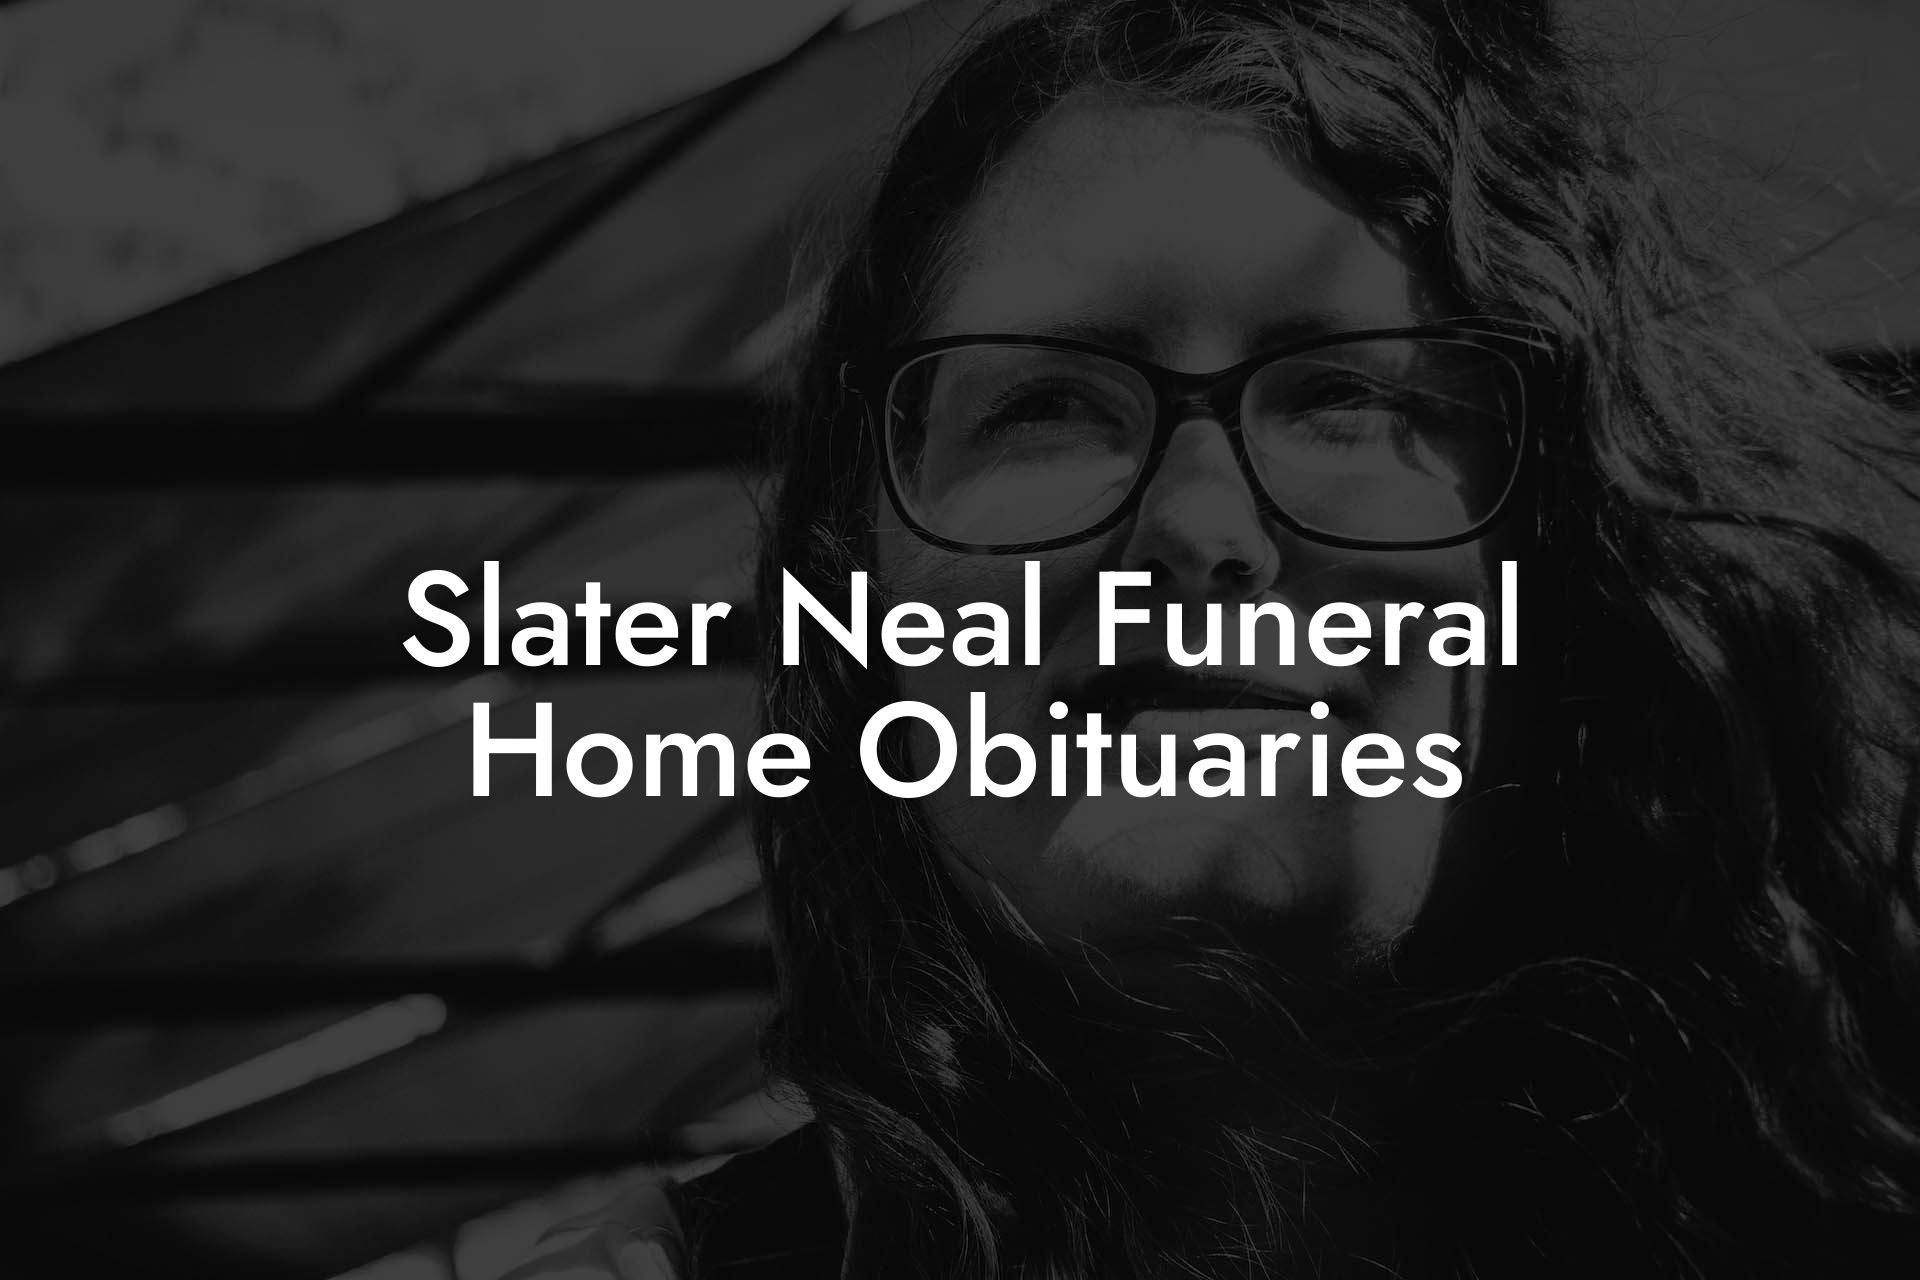 Slater Neal Funeral Home Obituaries